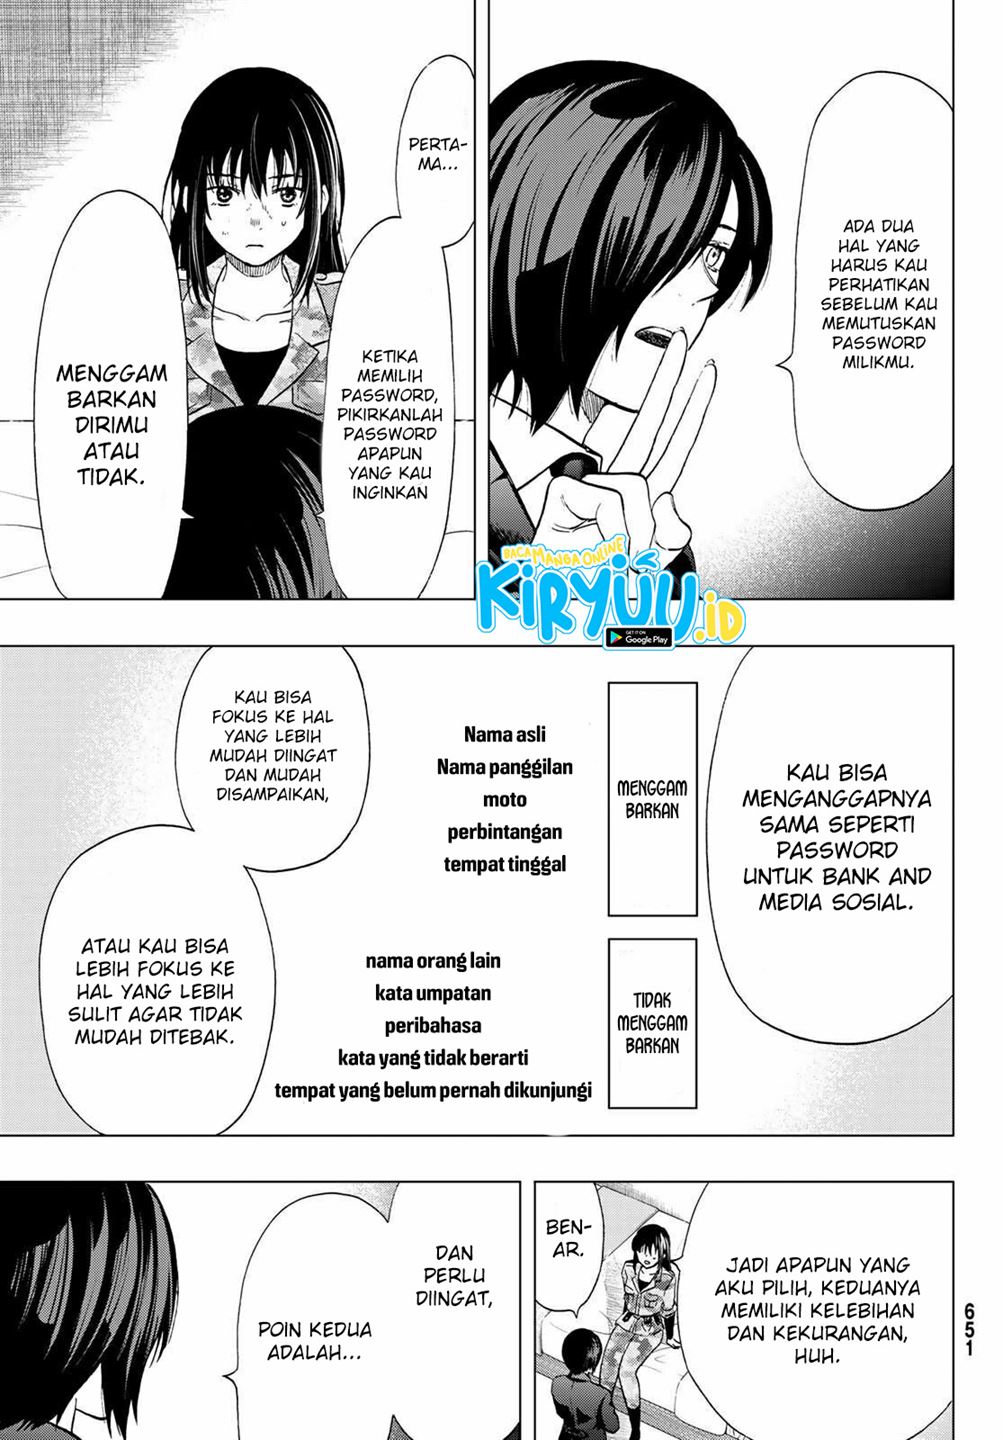 Tomodachi Game Chapter 87